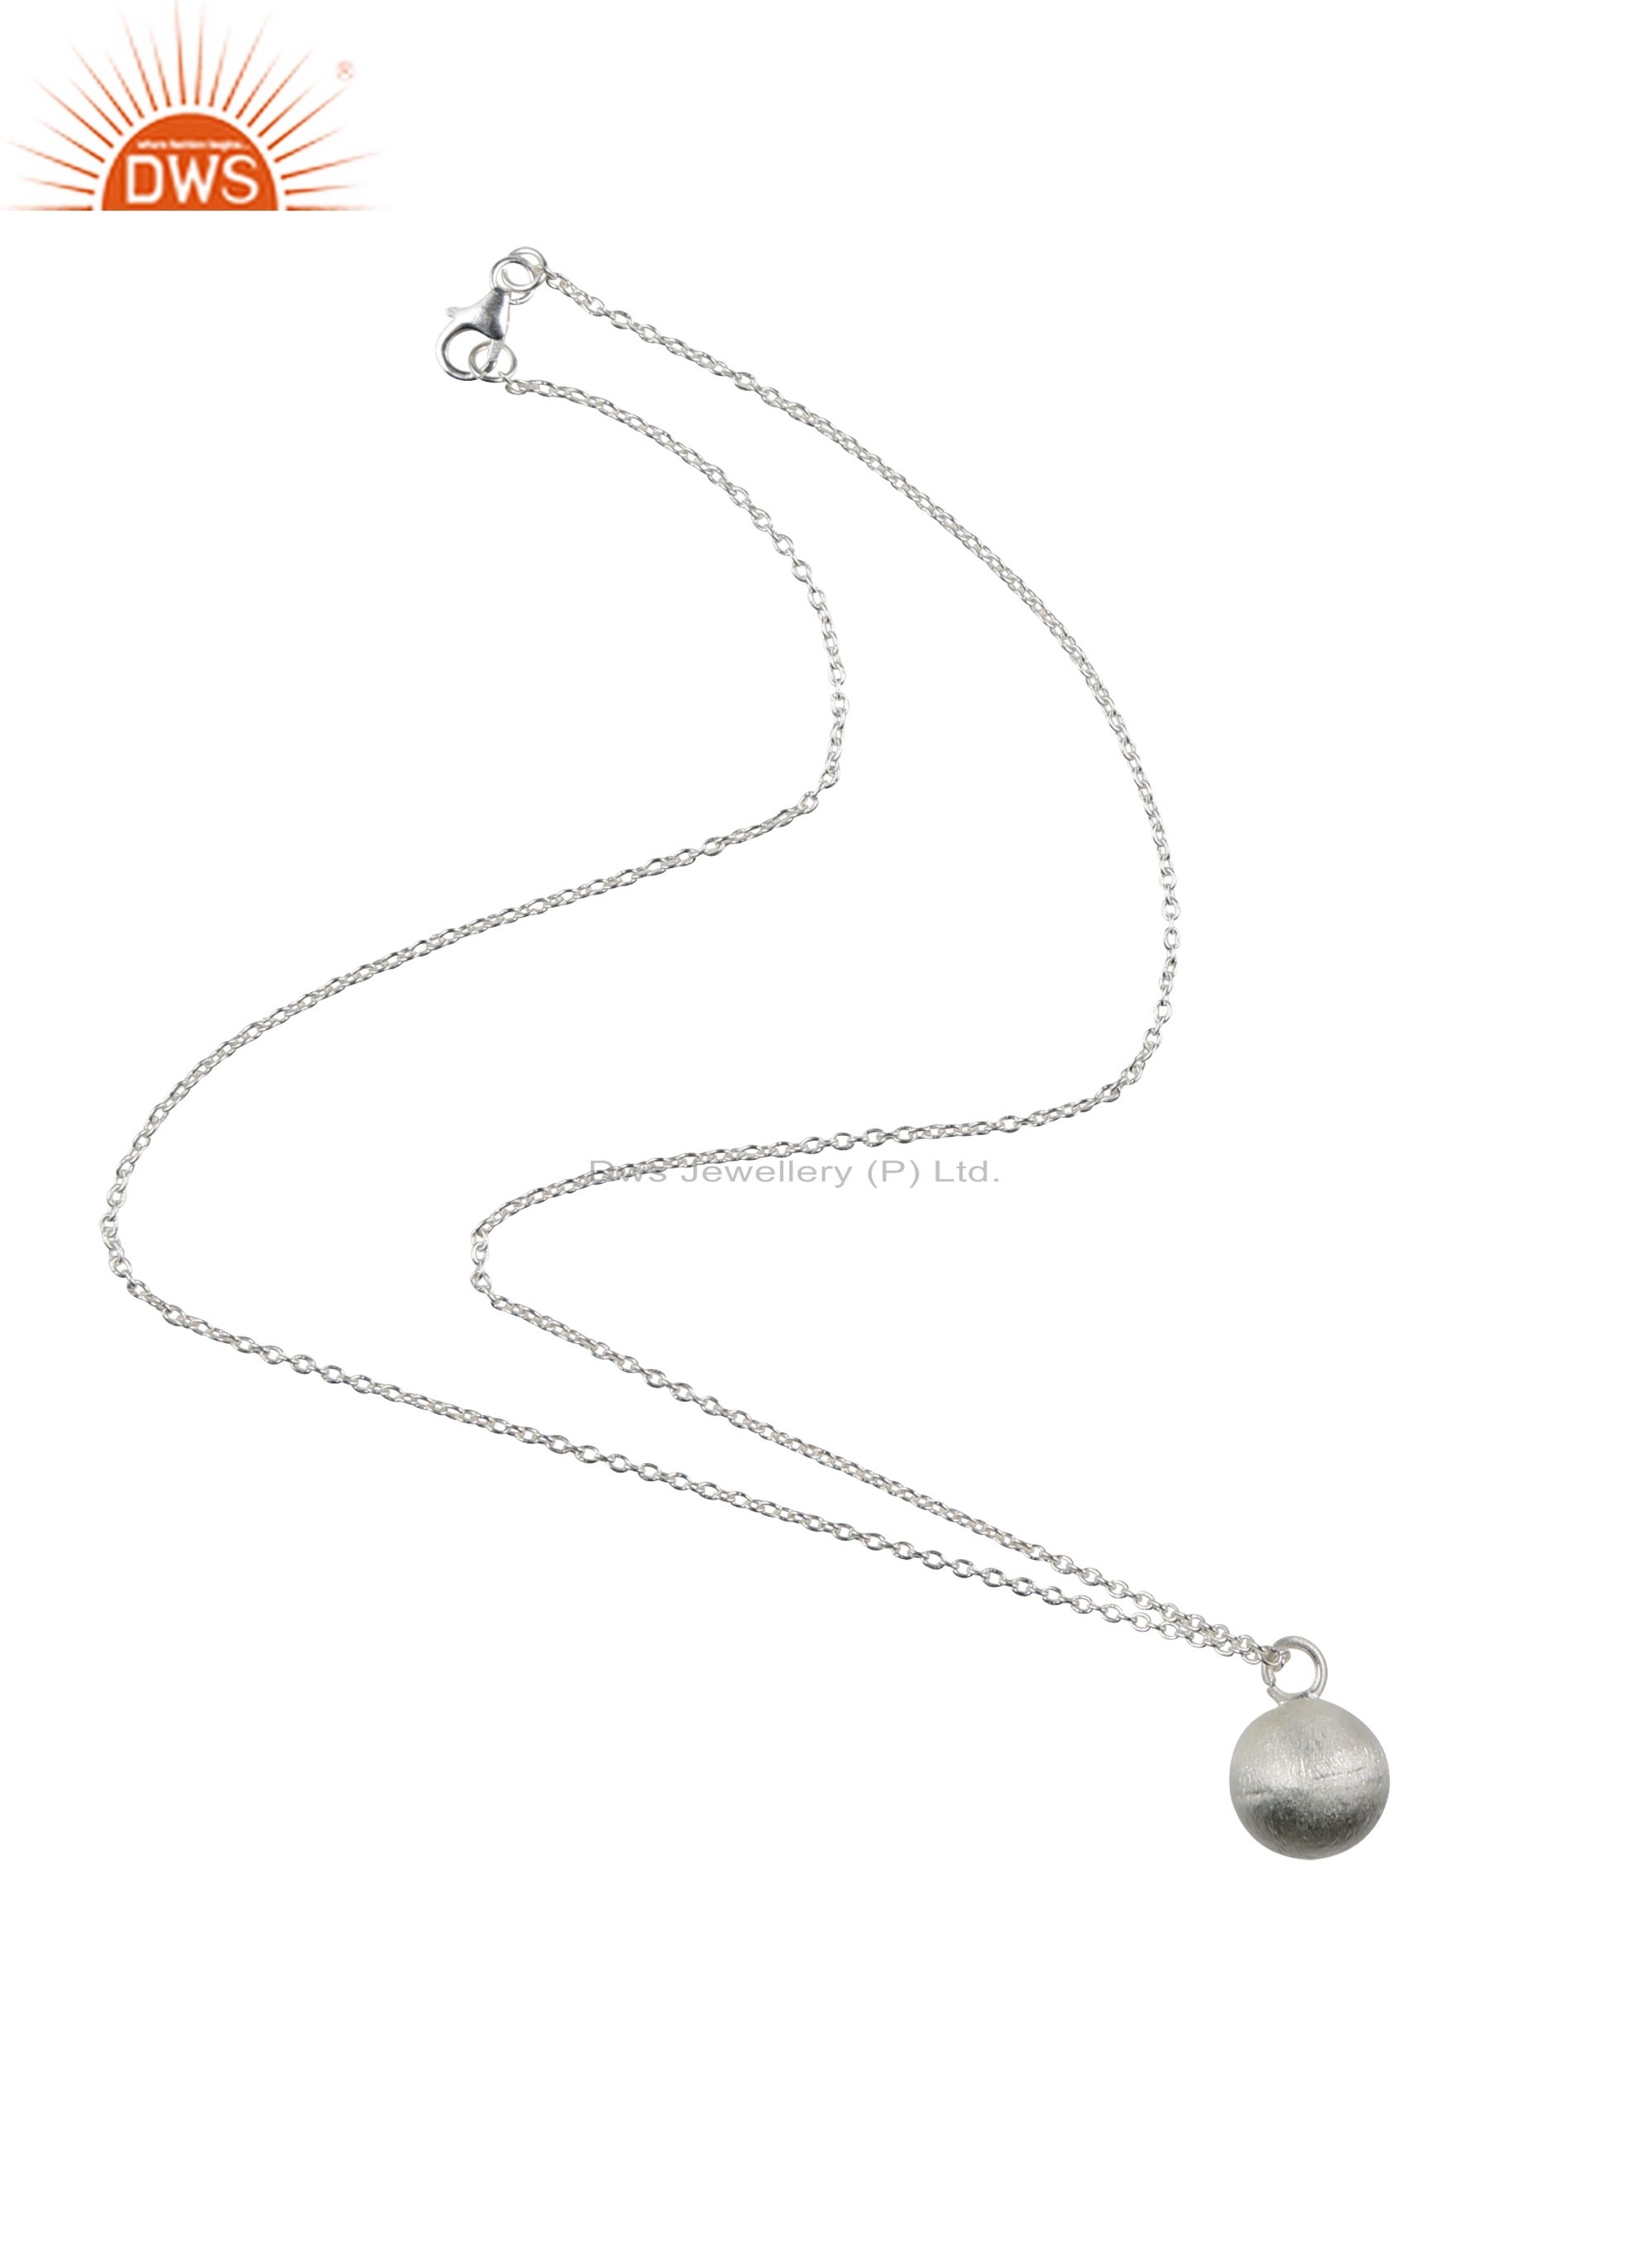 Handmade 925 sterling silver spheres pendant with 20" in chain necklace